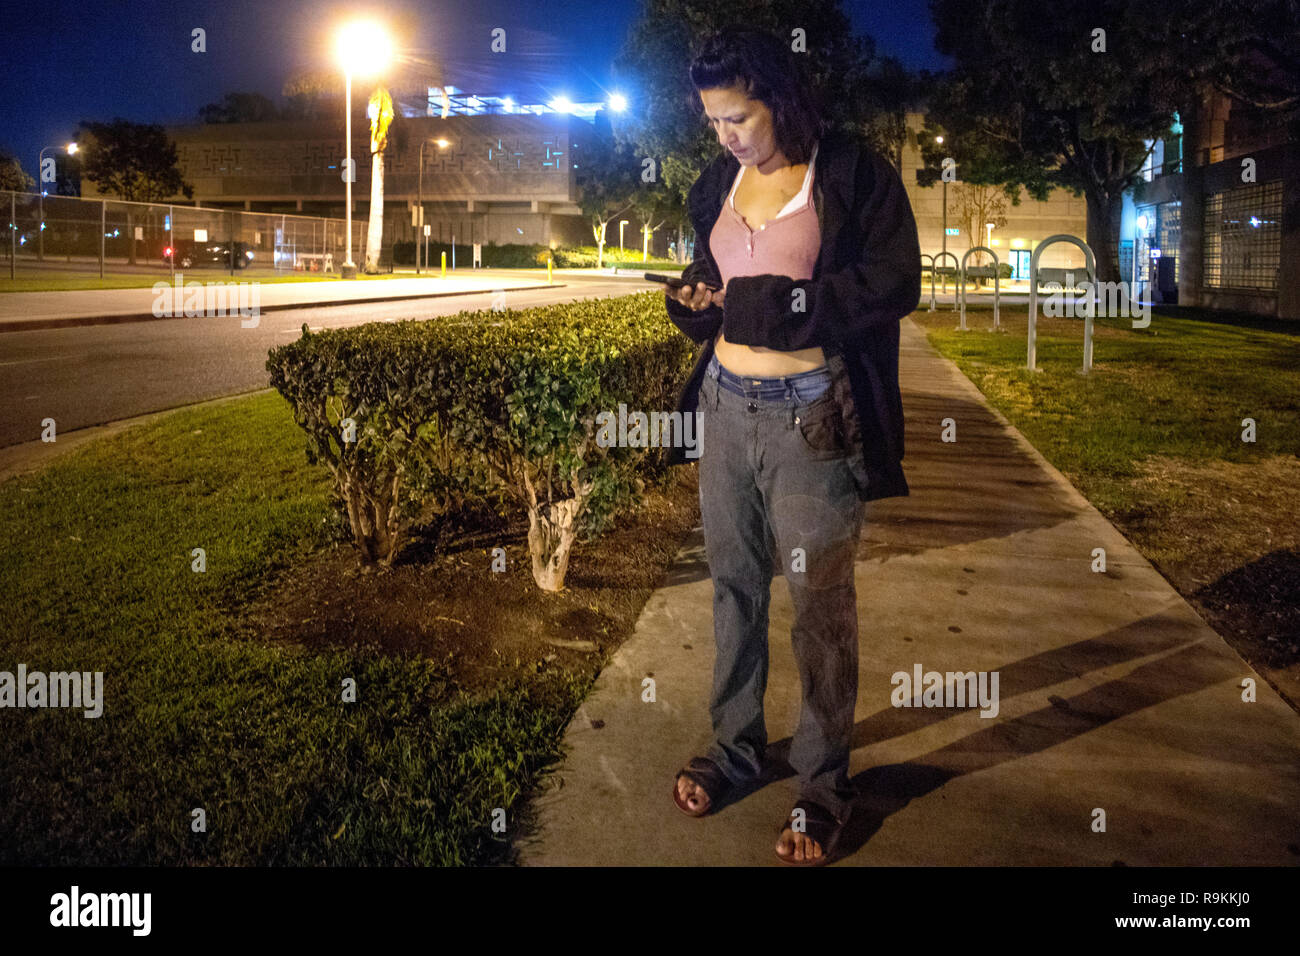 An released county jail inmate uses a donated cell phone to call for a ride at night in Santa Ana, CA. Stock Photo